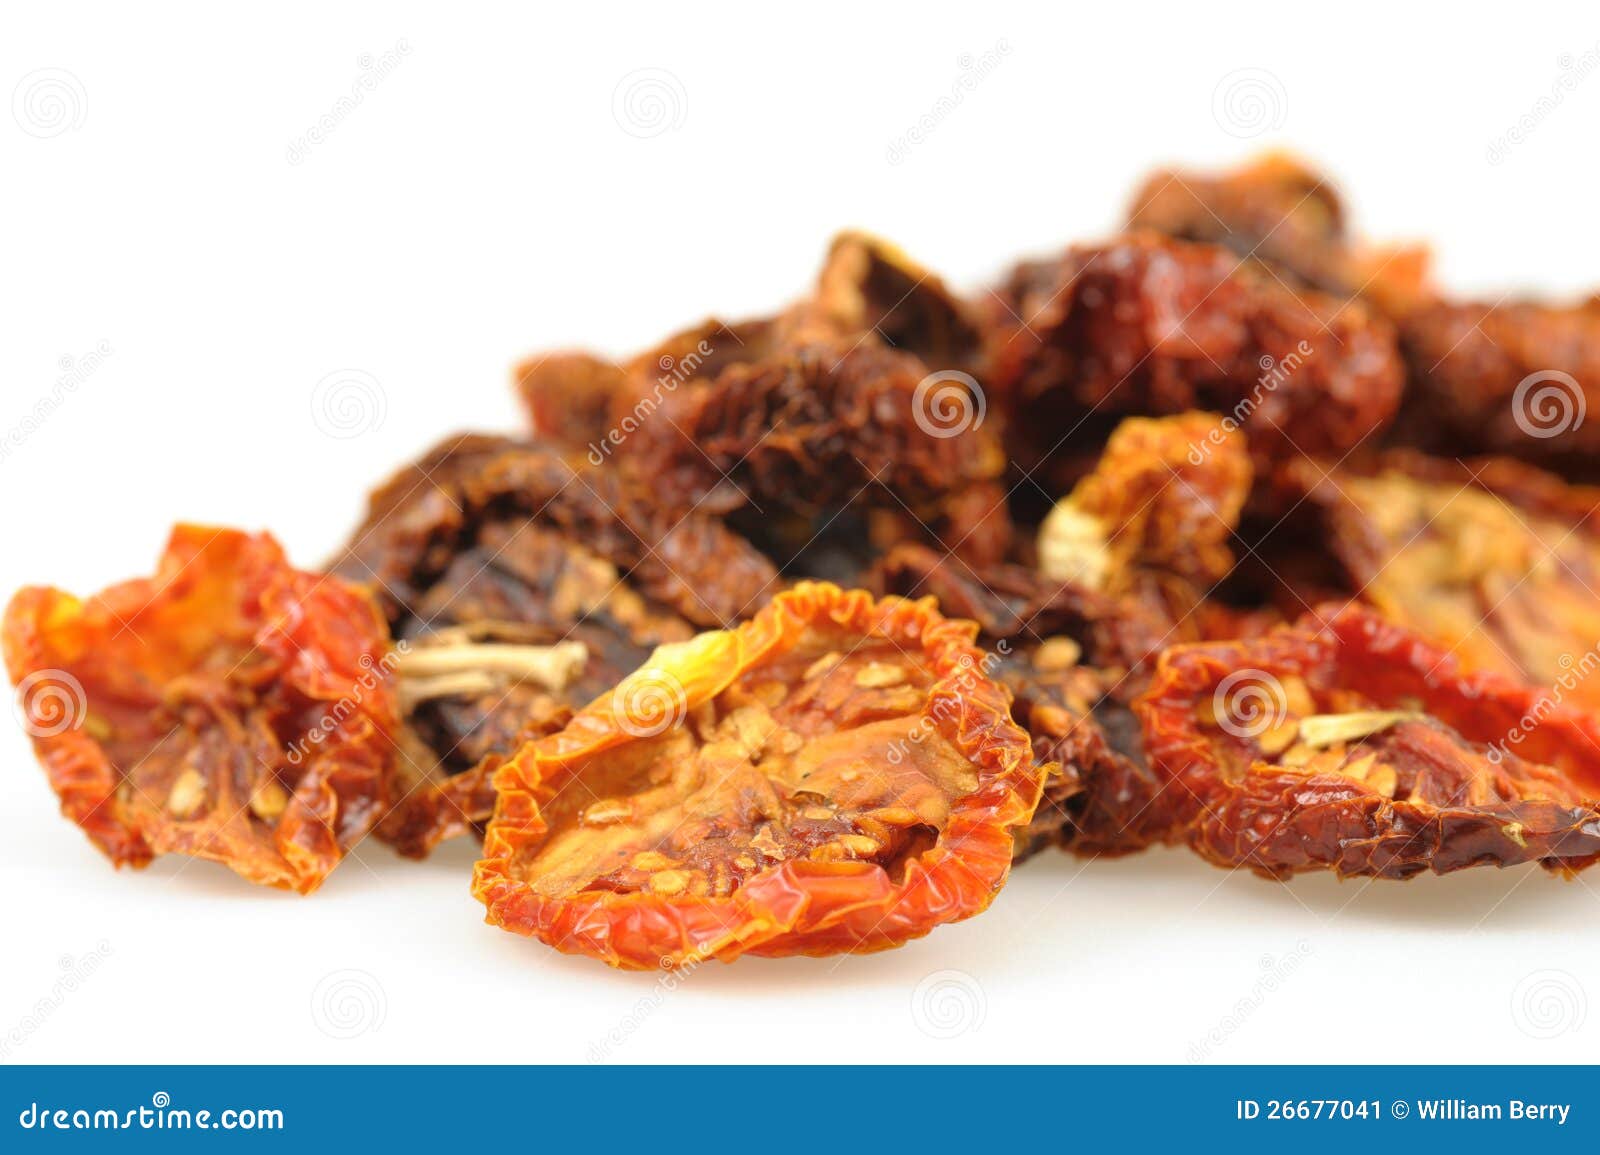 natural sundried tomatoes